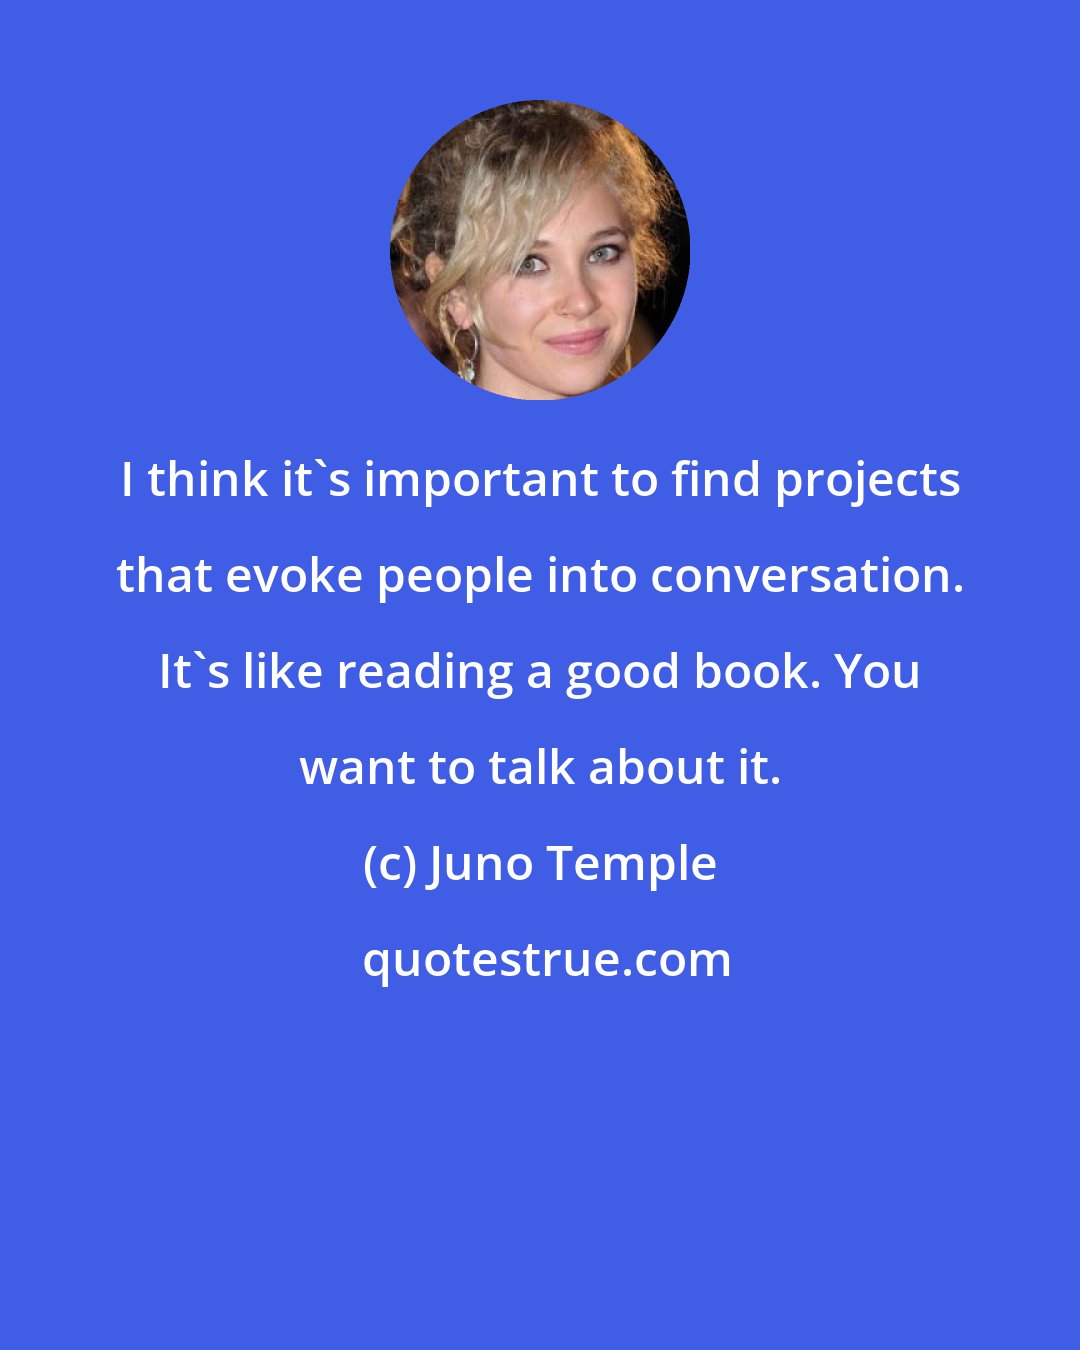 Juno Temple: I think it's important to find projects that evoke people into conversation. It's like reading a good book. You want to talk about it.